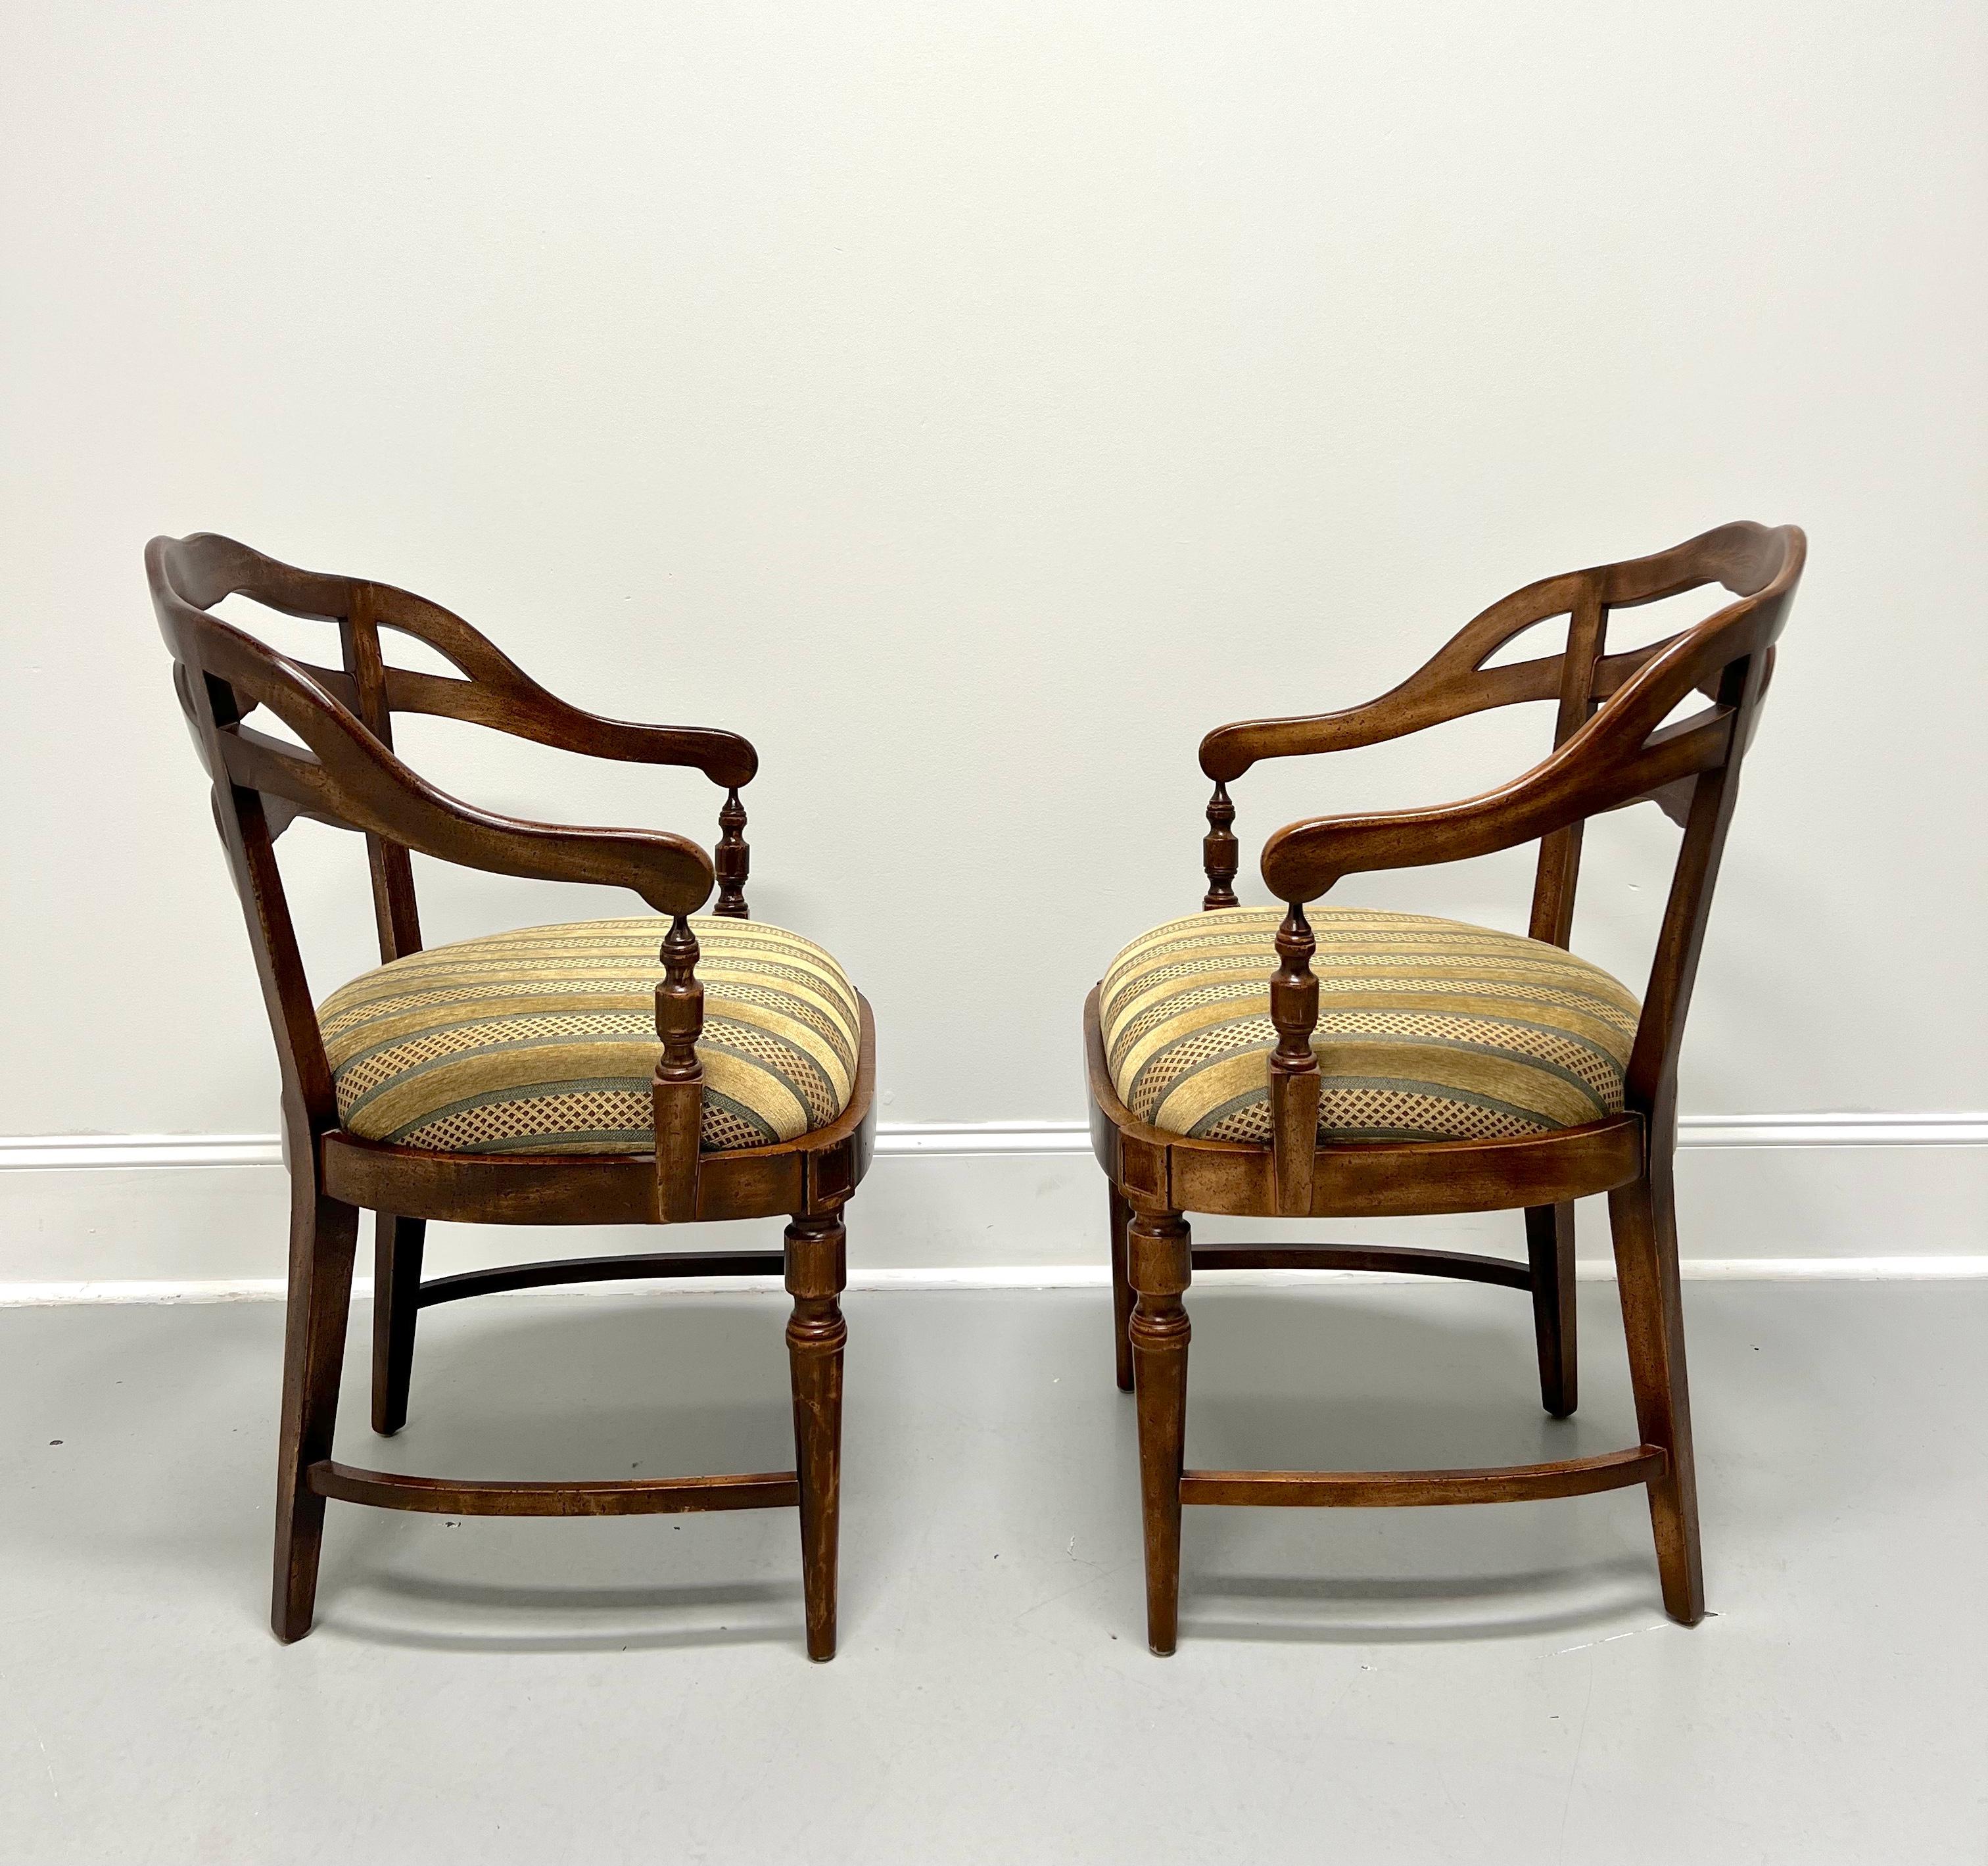 American Mid 20th Century Maple French Country Barrel Chairs - Pair For Sale